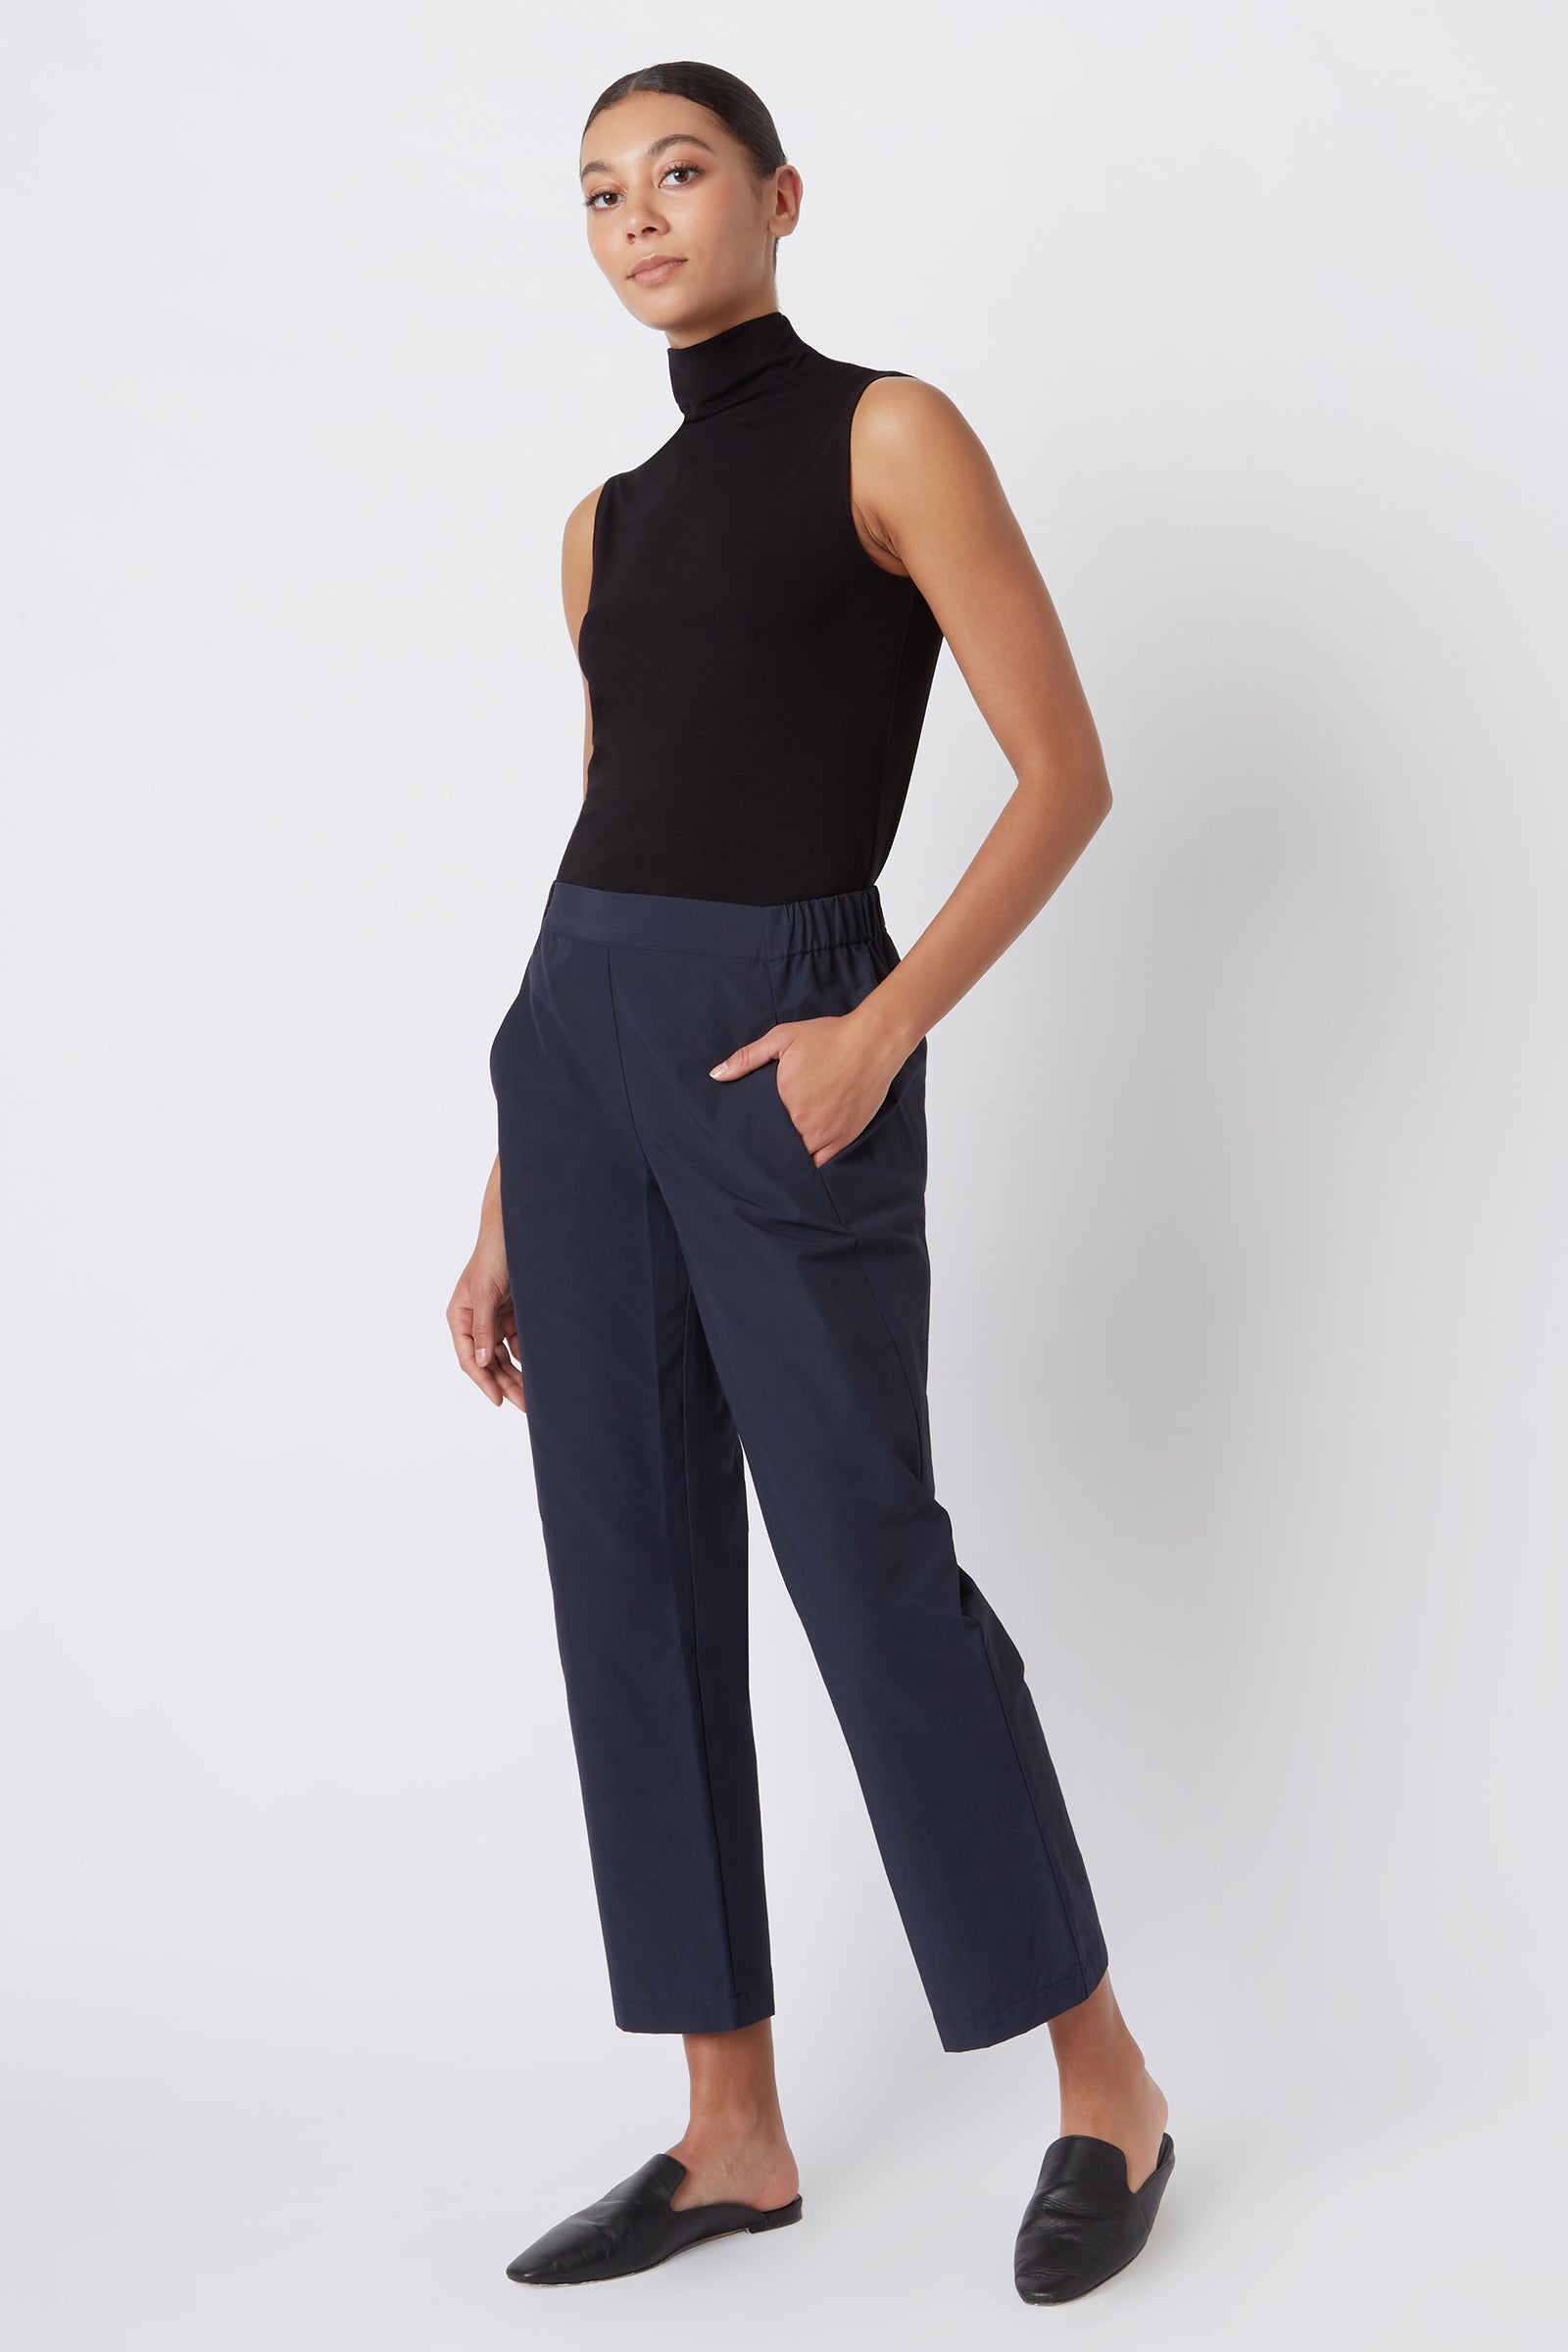 Kal Rieman Brit Crop Pant in Navy on Model with Hand on Pocket Full Front View